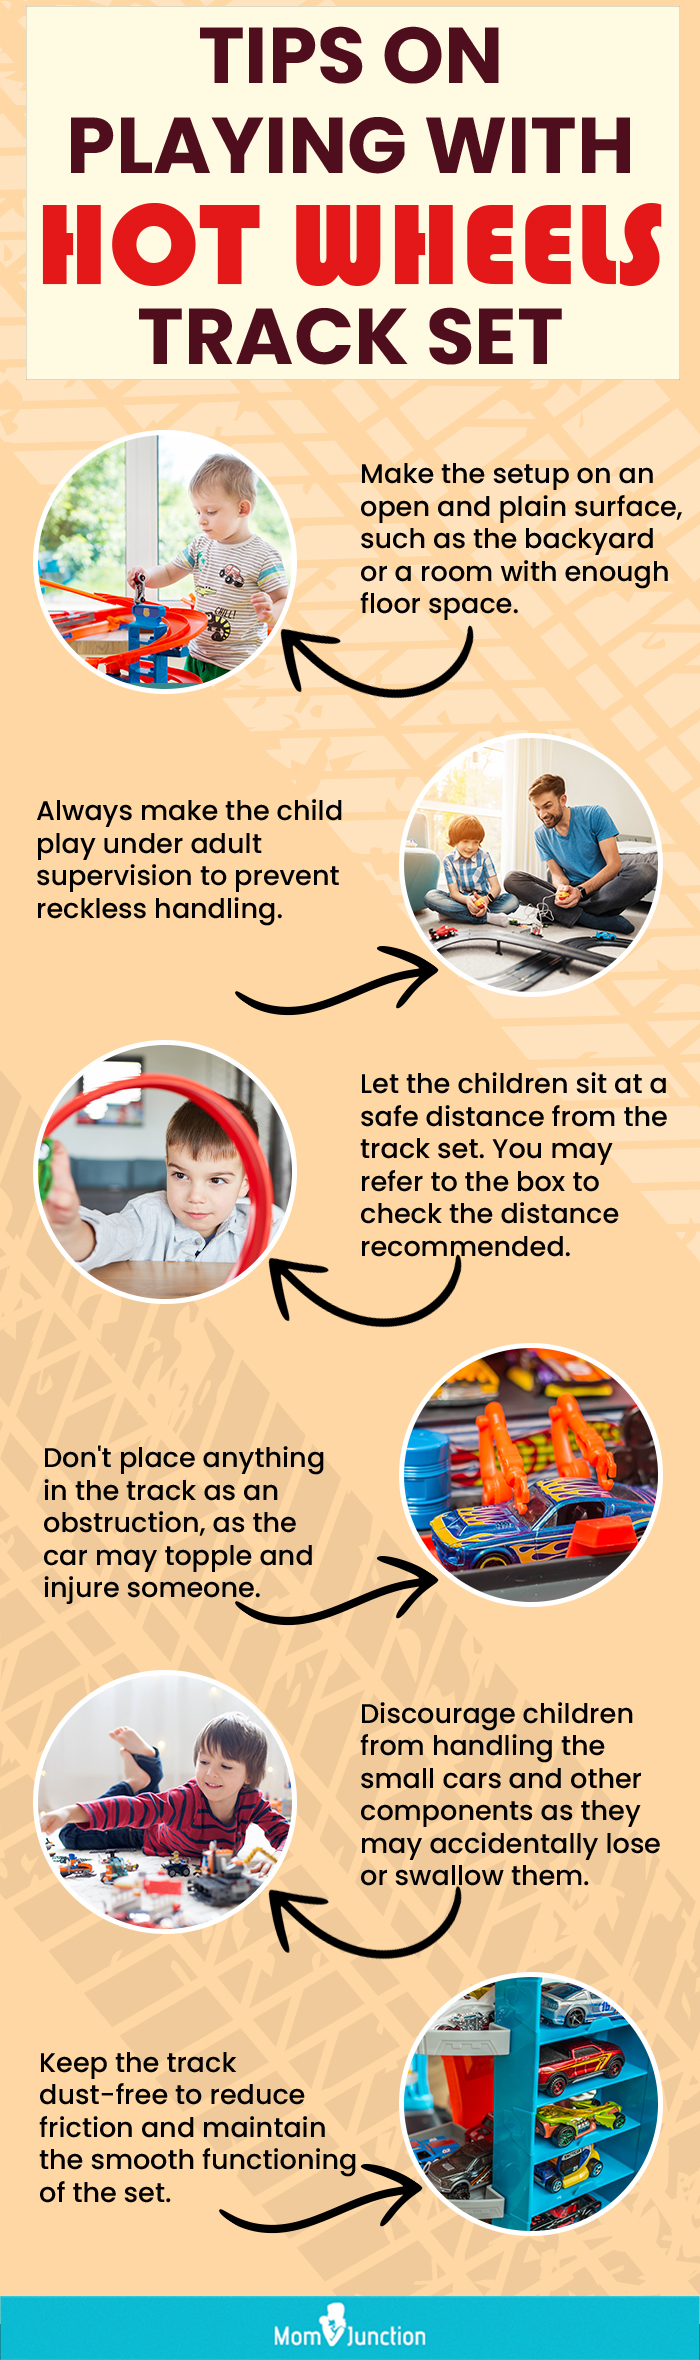 Tips On Playing With Hot Wheels Track Set